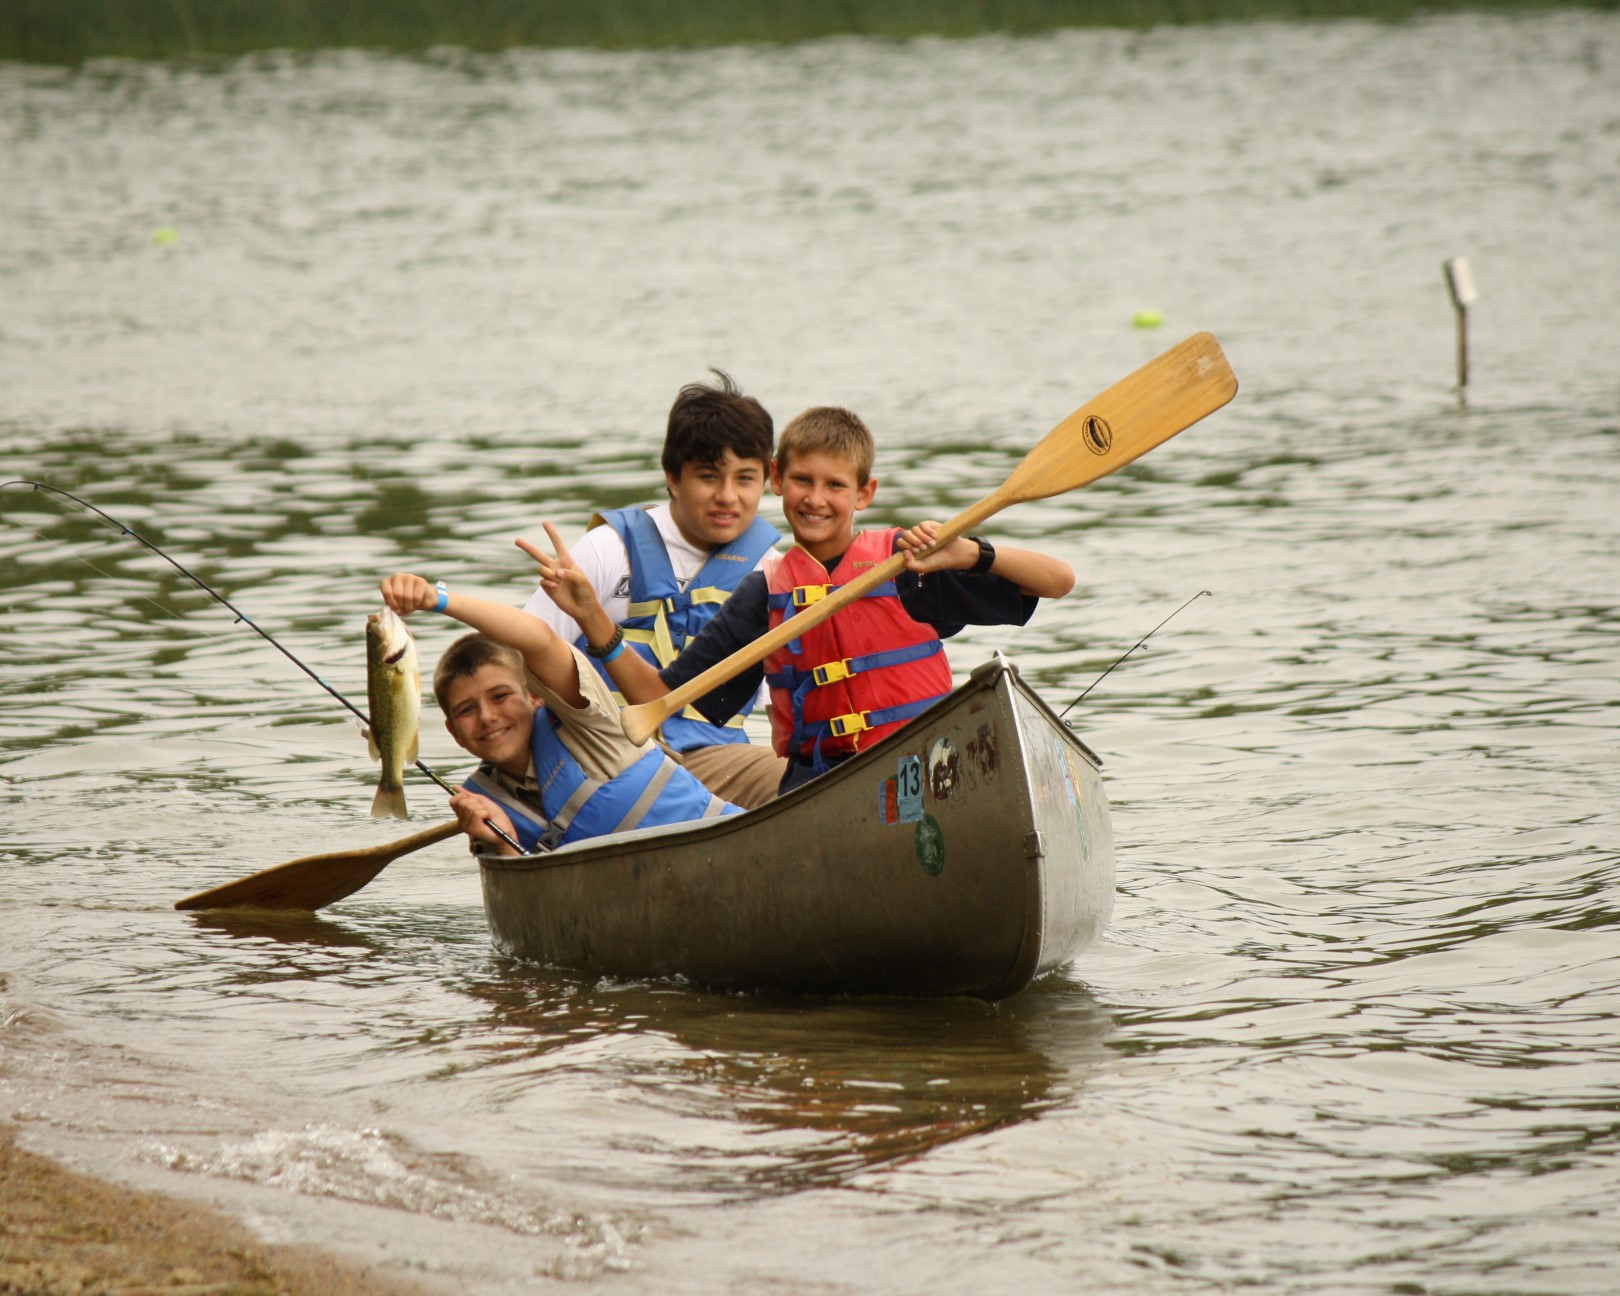 Three Scouts are in a canoe on the lake. One is holding a paddle, one is holding a fishing rod, and the third is holding a head-sized fish